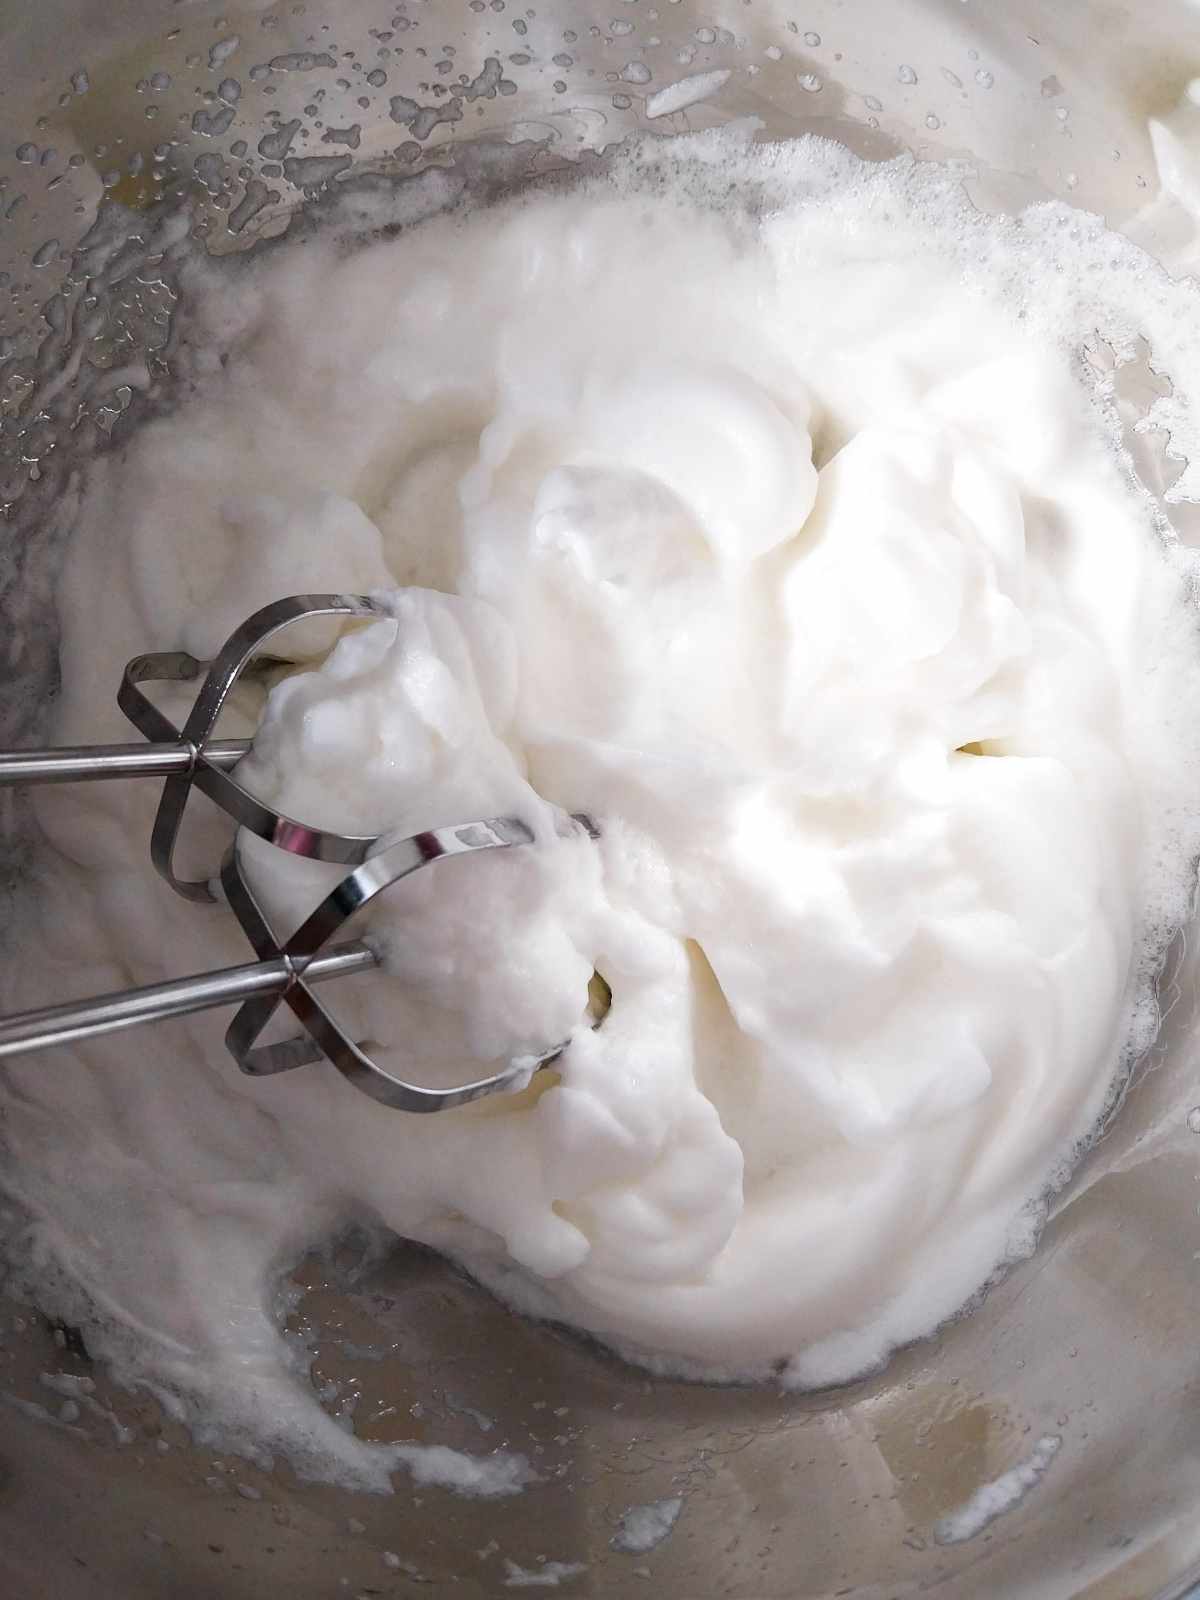 Egg whites whipped until they have stiff peaks.